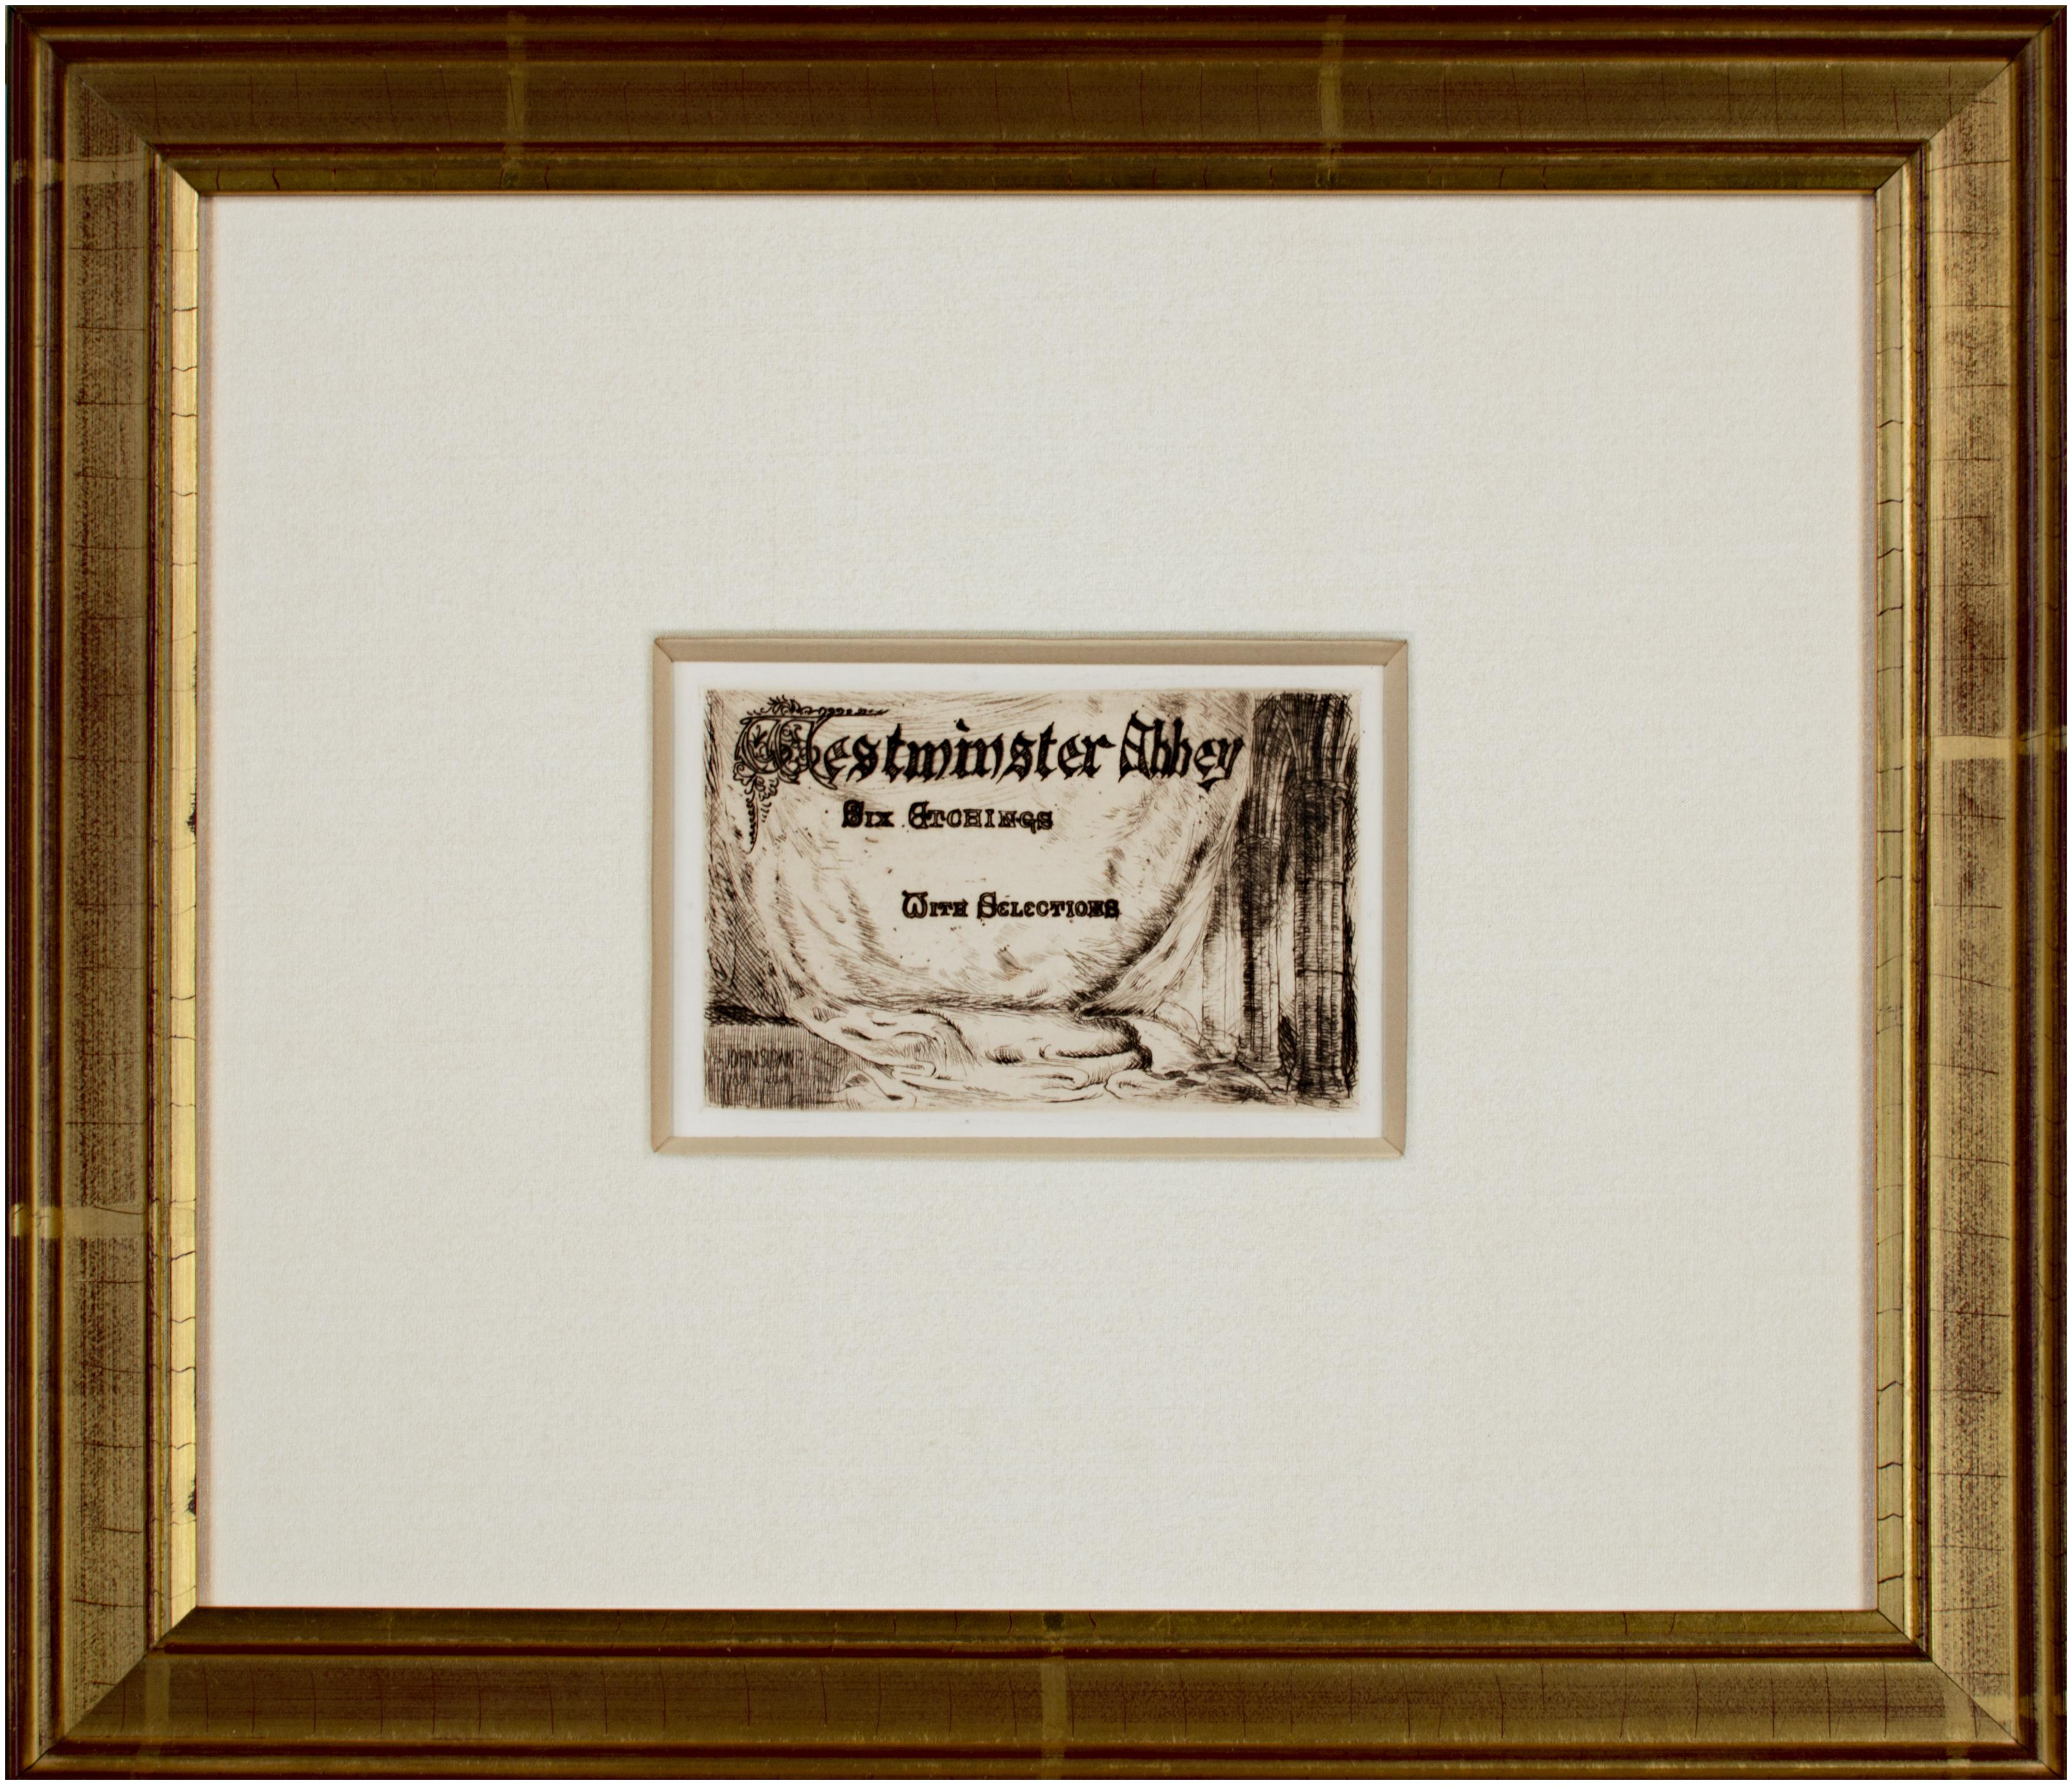 "Westminster Abbey, " complete portfolio of 13 etchings by John Sloan